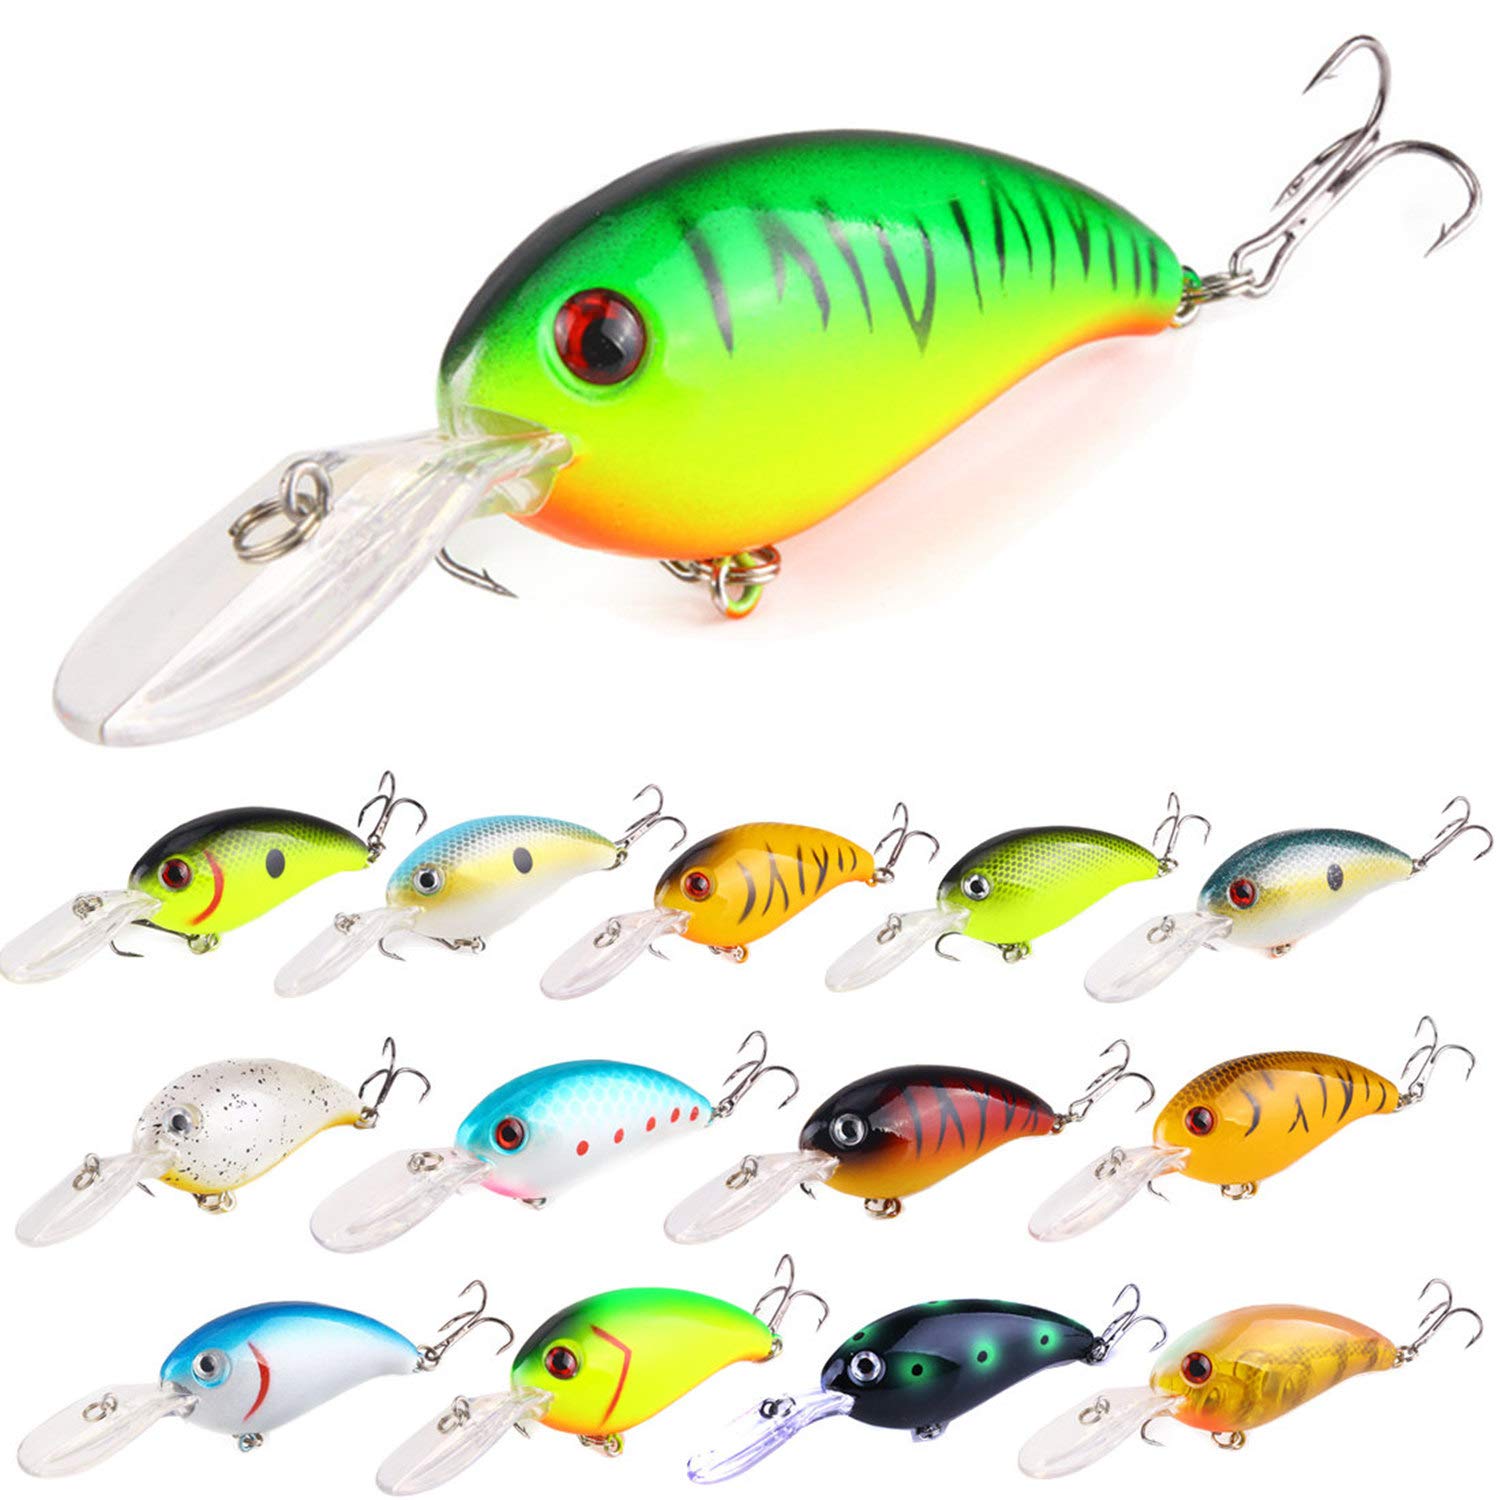  Minnow Lures,Fishing Lures for Bass,Fishing Tackle CrankBait  Bass,Hard Bait Swimbait Fishing Lure,Topwater Lures for Trout Walleye Bass  Freshwater/Saltwater Artificial Fishing Lure,10pcs/Box : Sports & Outdoors